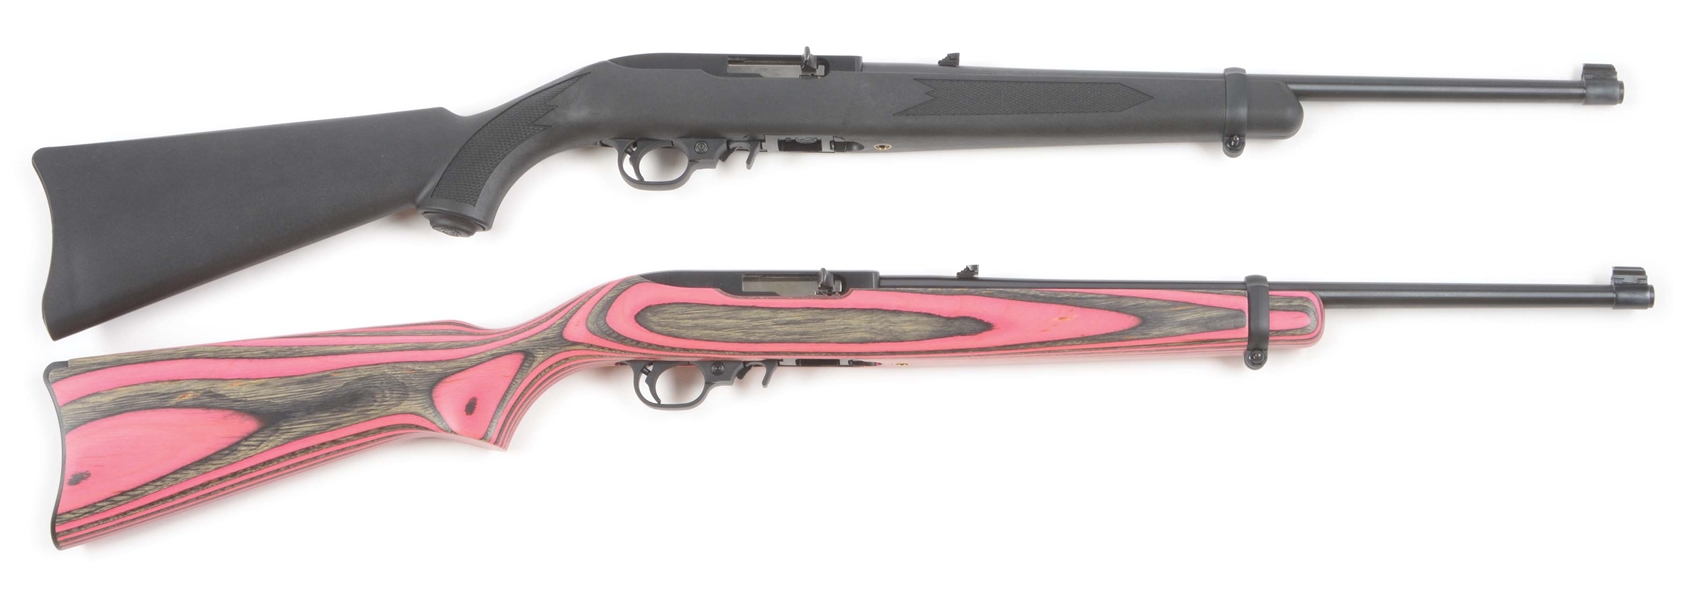 (M) LOT OF TWO: RUGER 10/22 SEMI AUTOMATIC RIFLES.